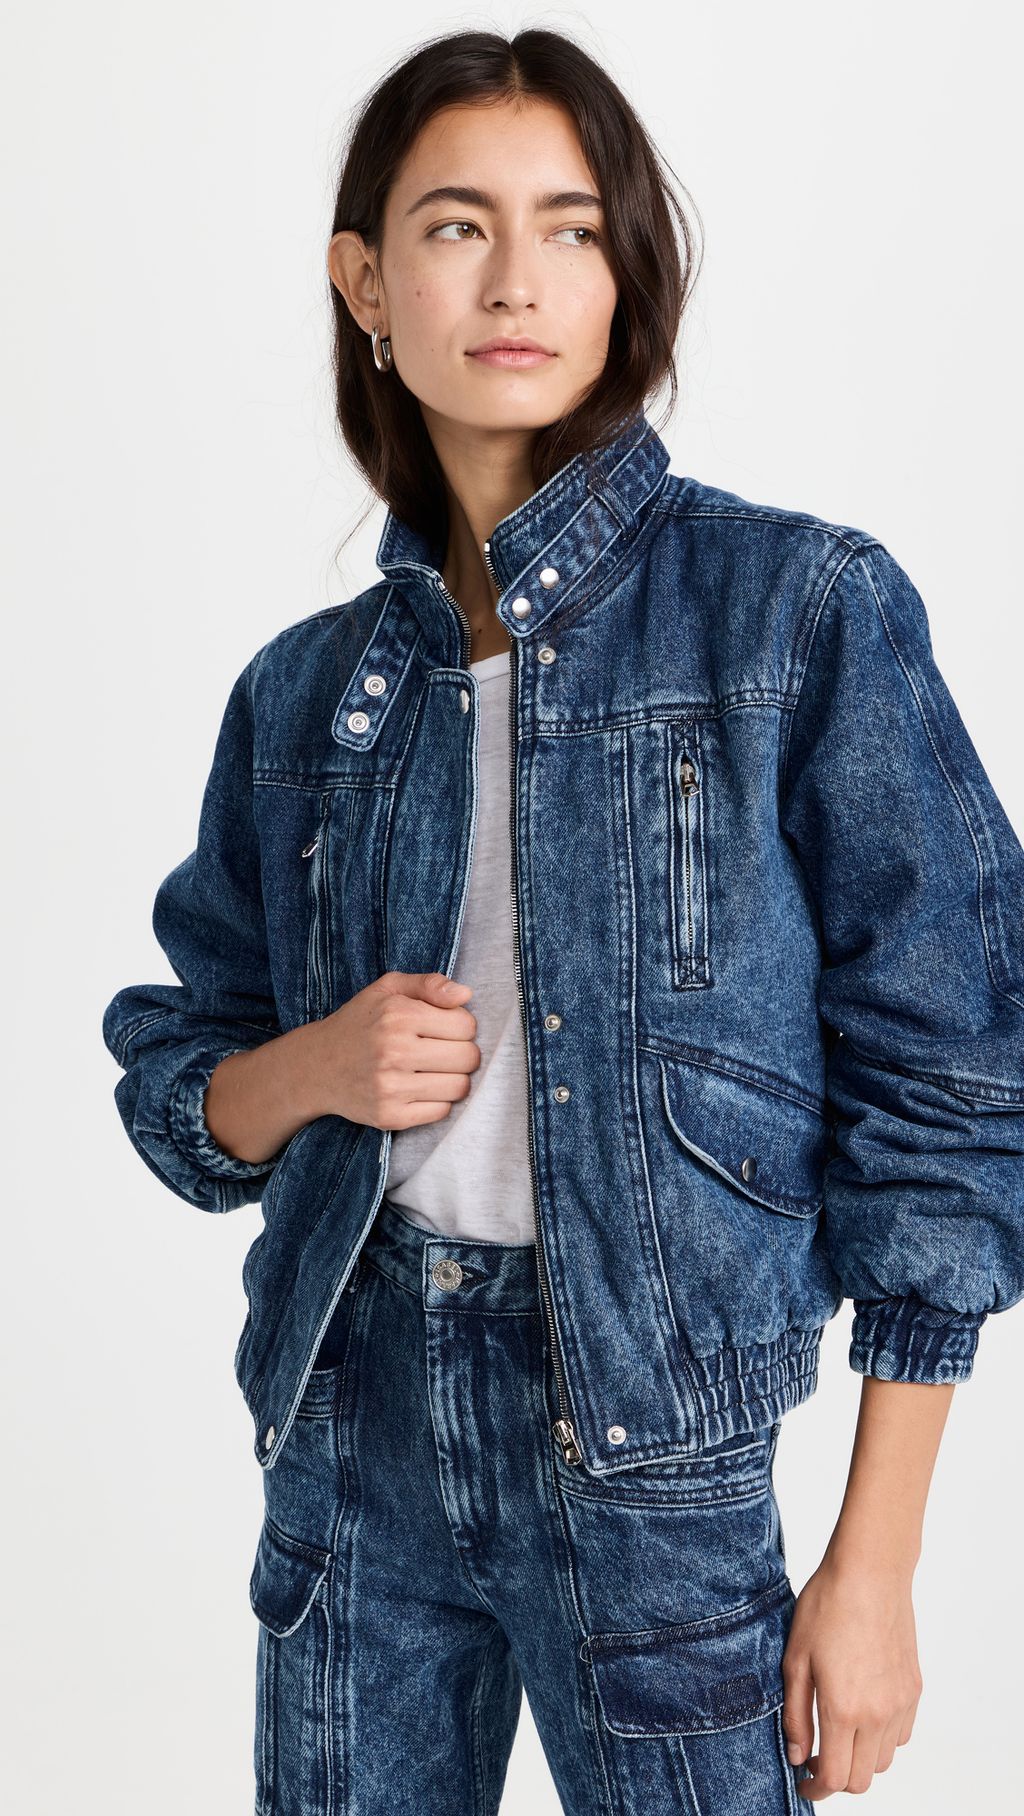 10 Cool Denim-Jacket Outfits That Prove the Staple Is Back | Who What Wear